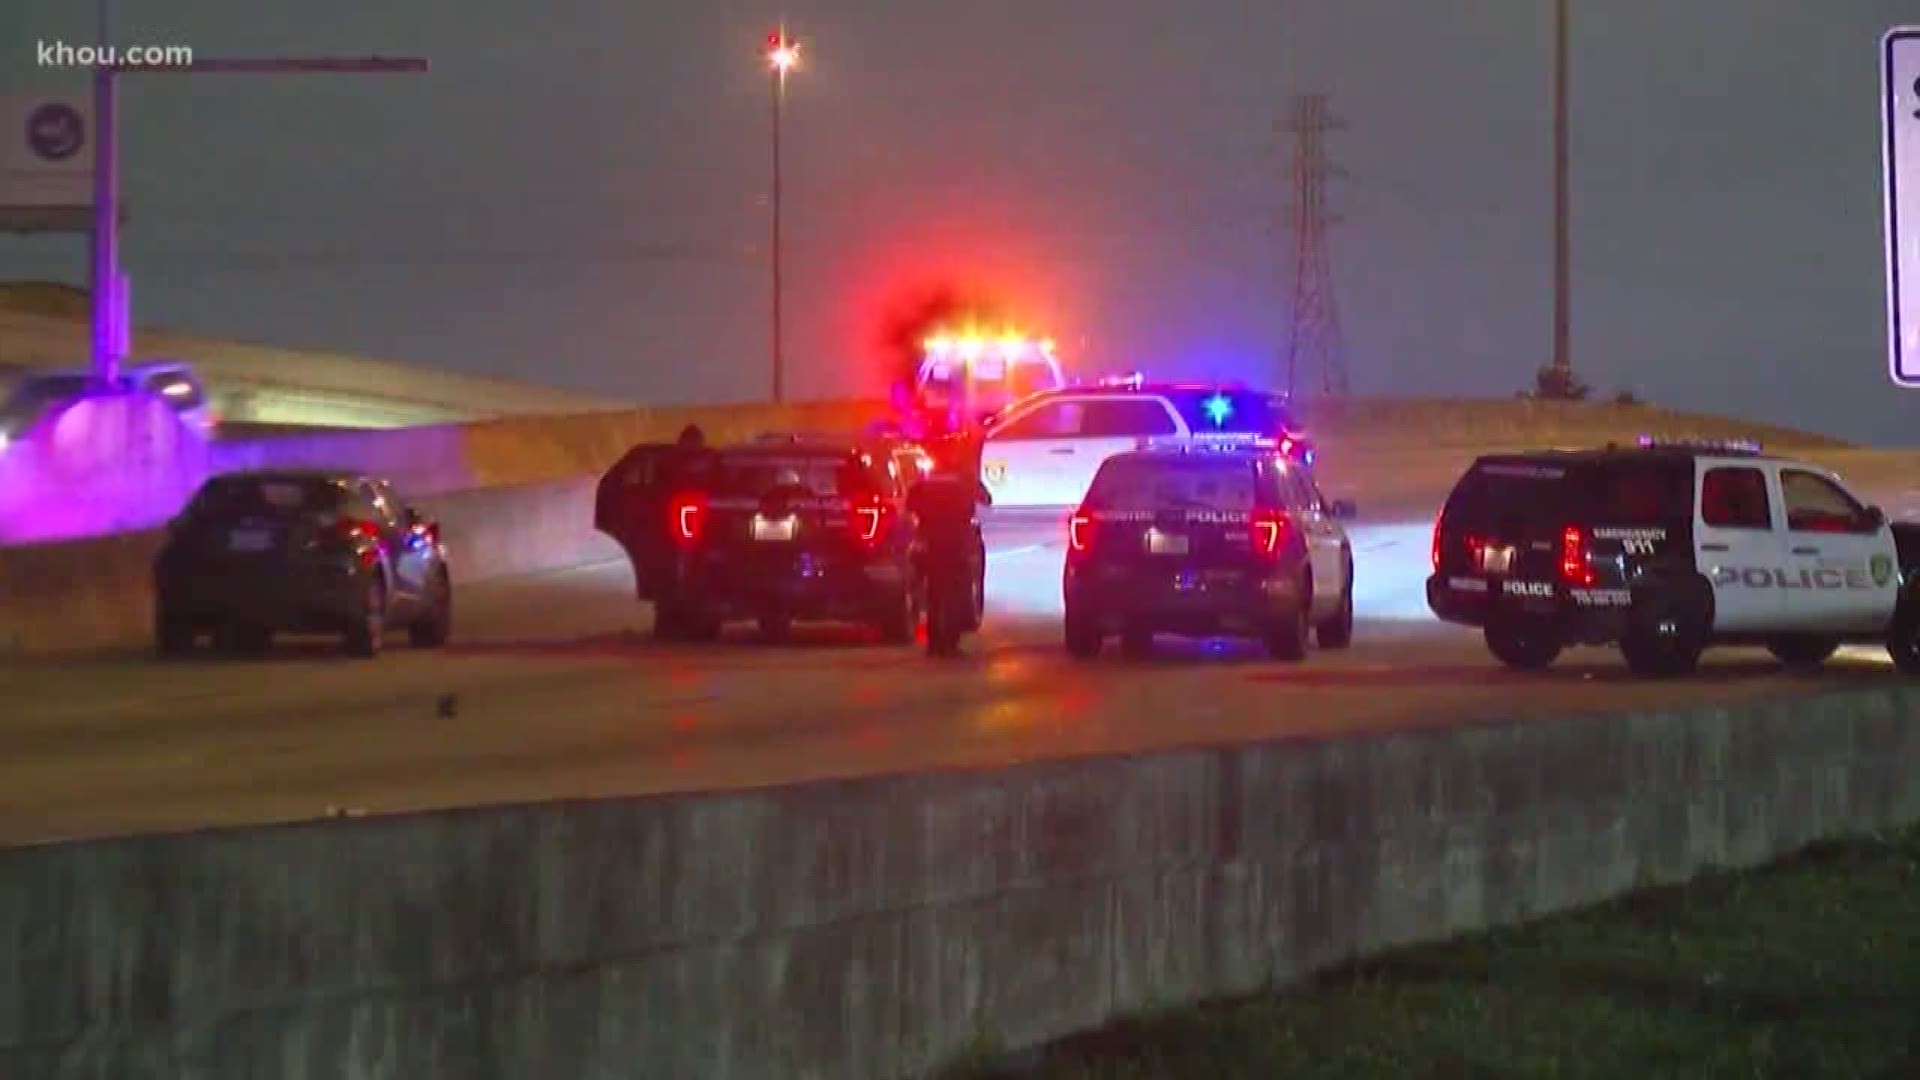 A man is dead and another person is in critical condition after they were hit by a car on the Gulf Freeway. The driver of the car is being tested for intoxication.